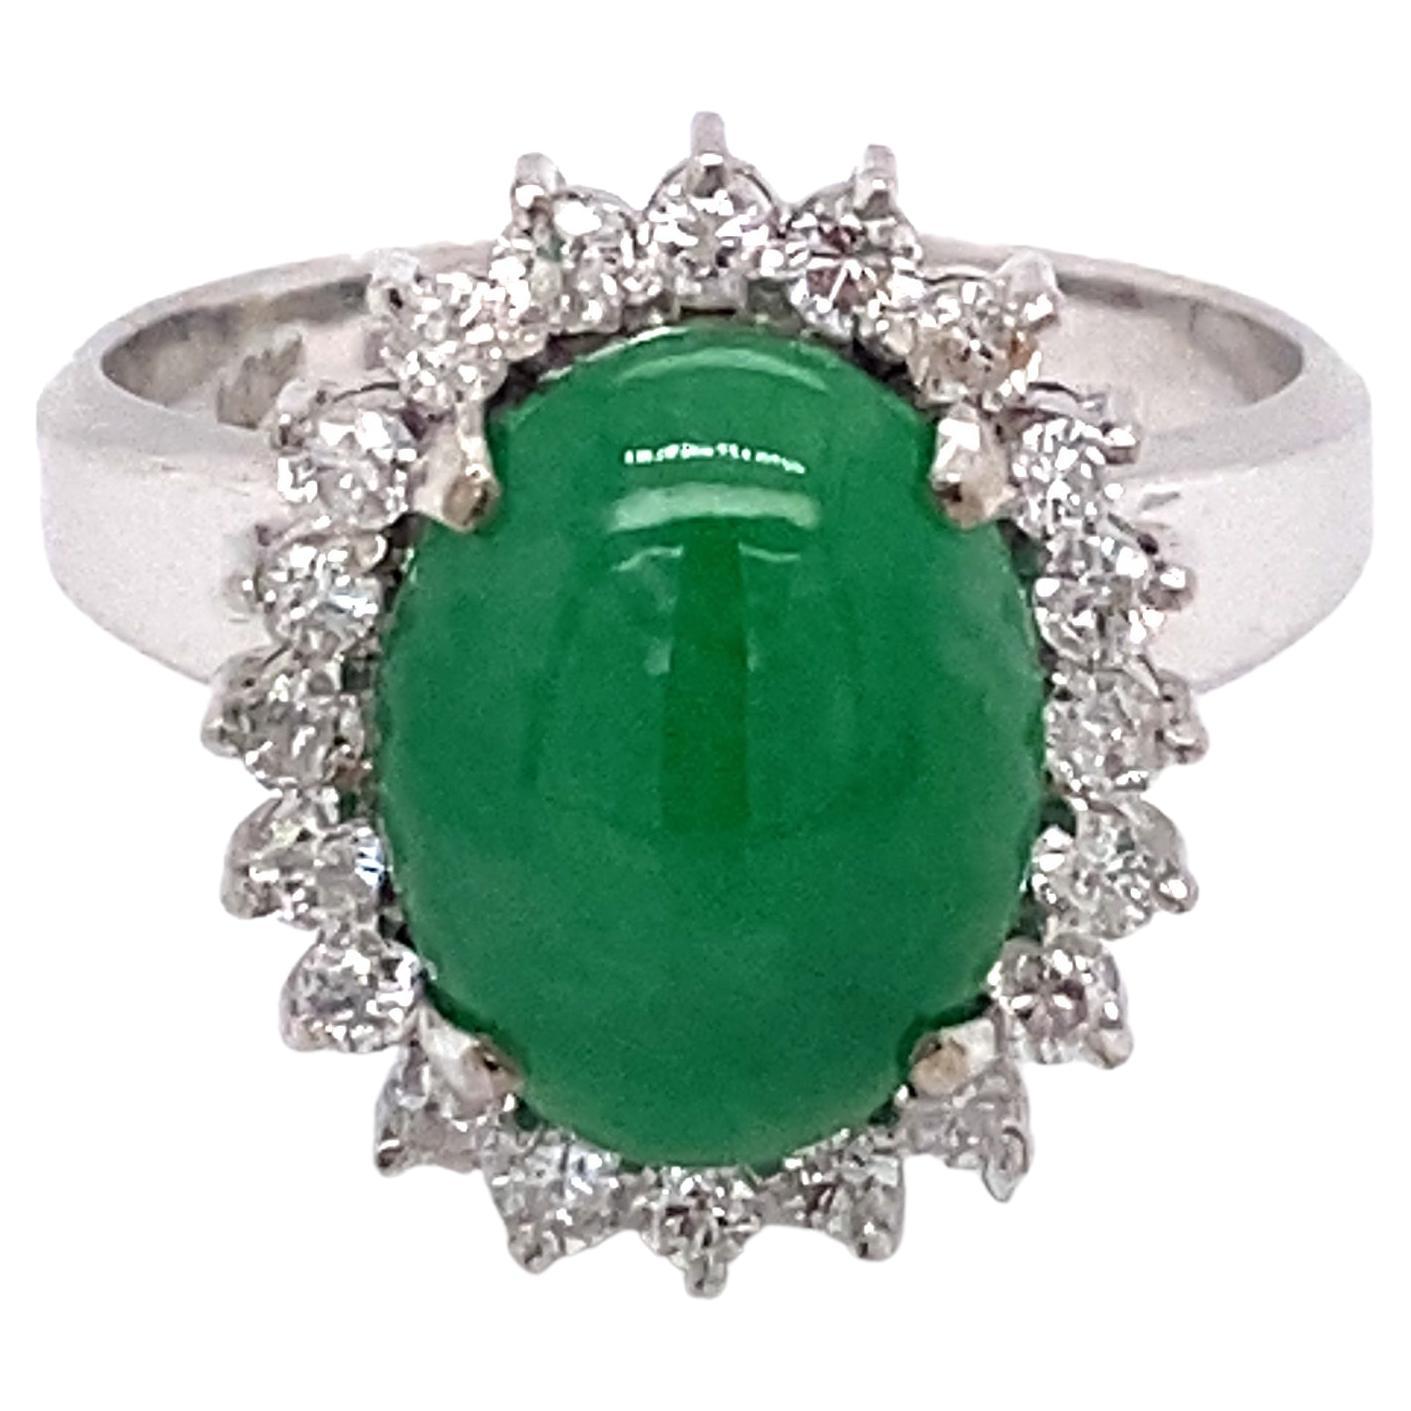 Circa 1960s Candy Apple Green Jade and Diamond Ring in 14K White Gold For Sale